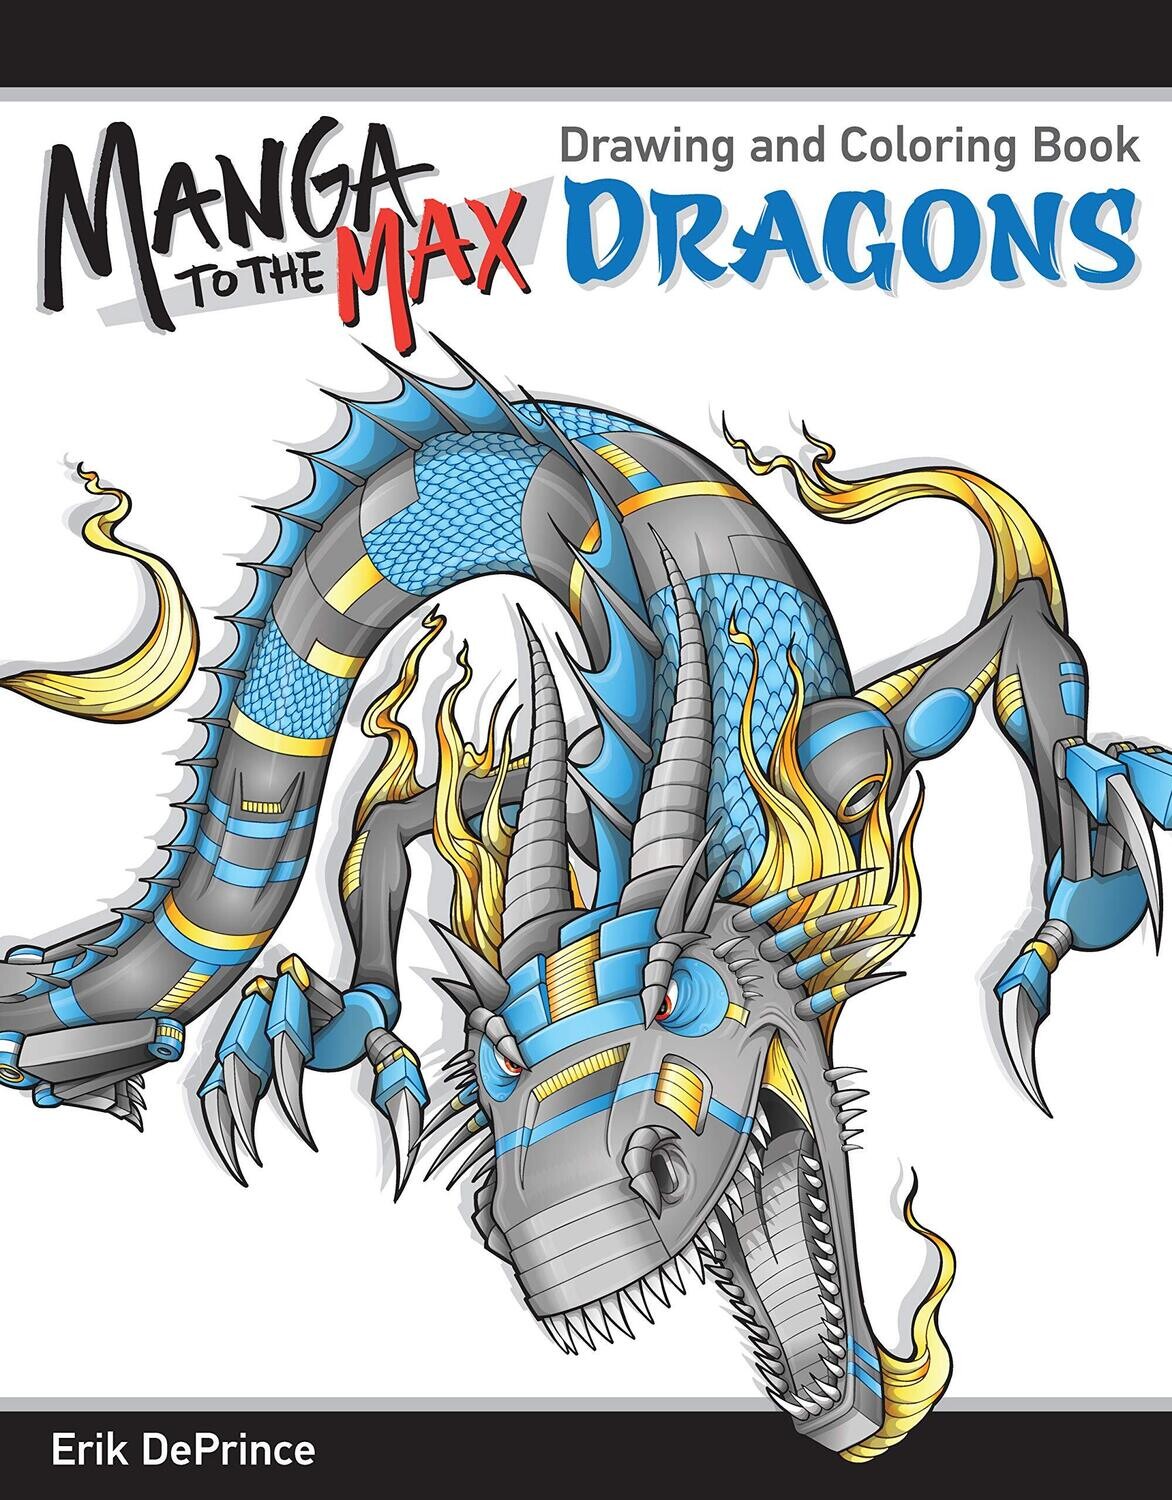 Manga to the Max Dragons: Drawing and Coloring Book